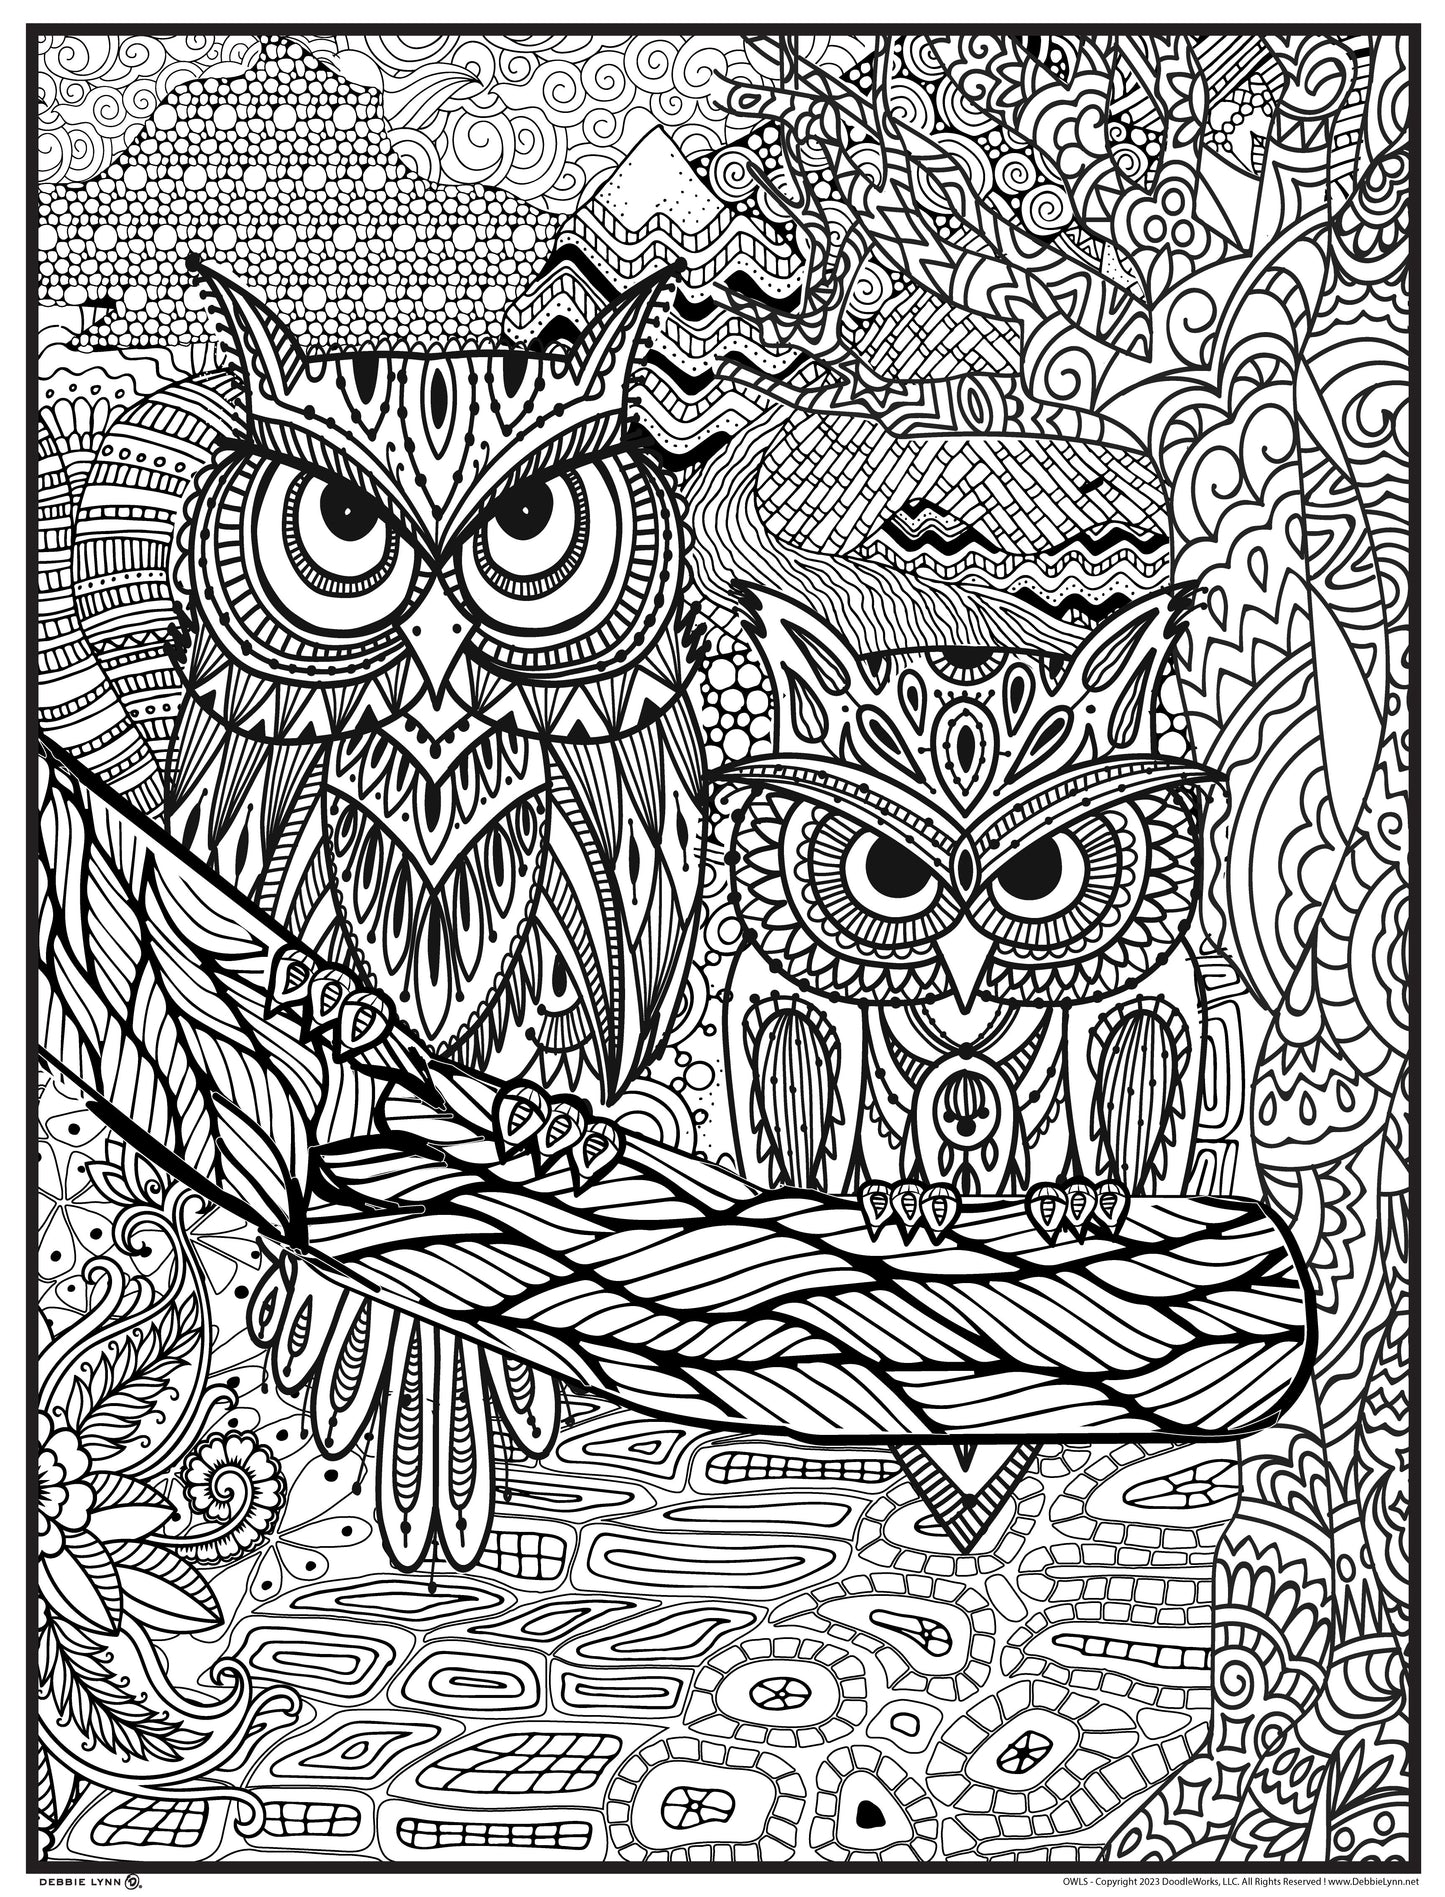 Owl Personalized Giant Coloring Poster 46"x60"